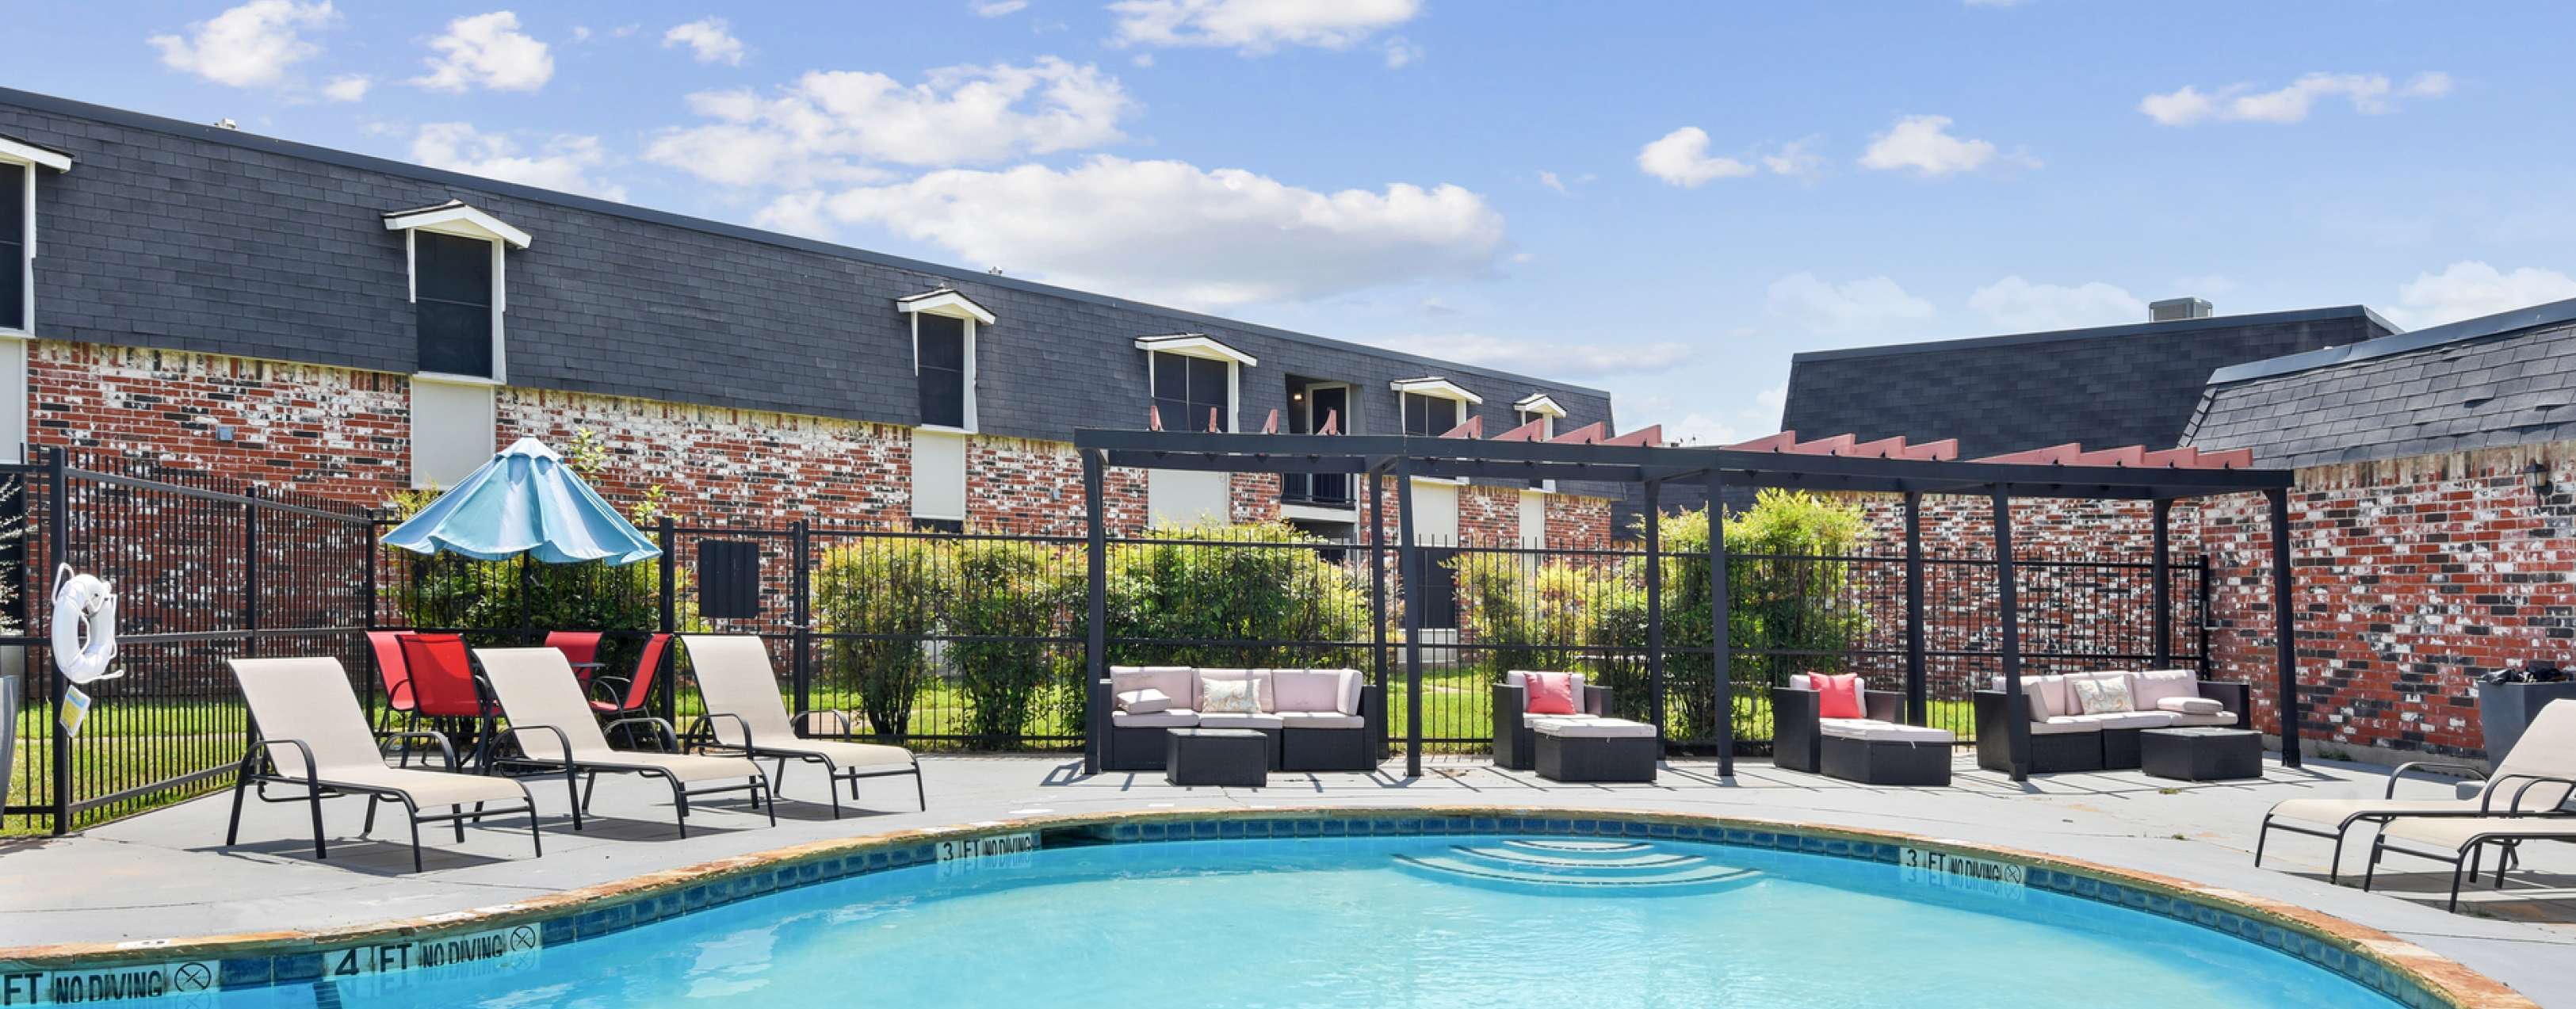 Poolside view of Fleetwood Square apartments